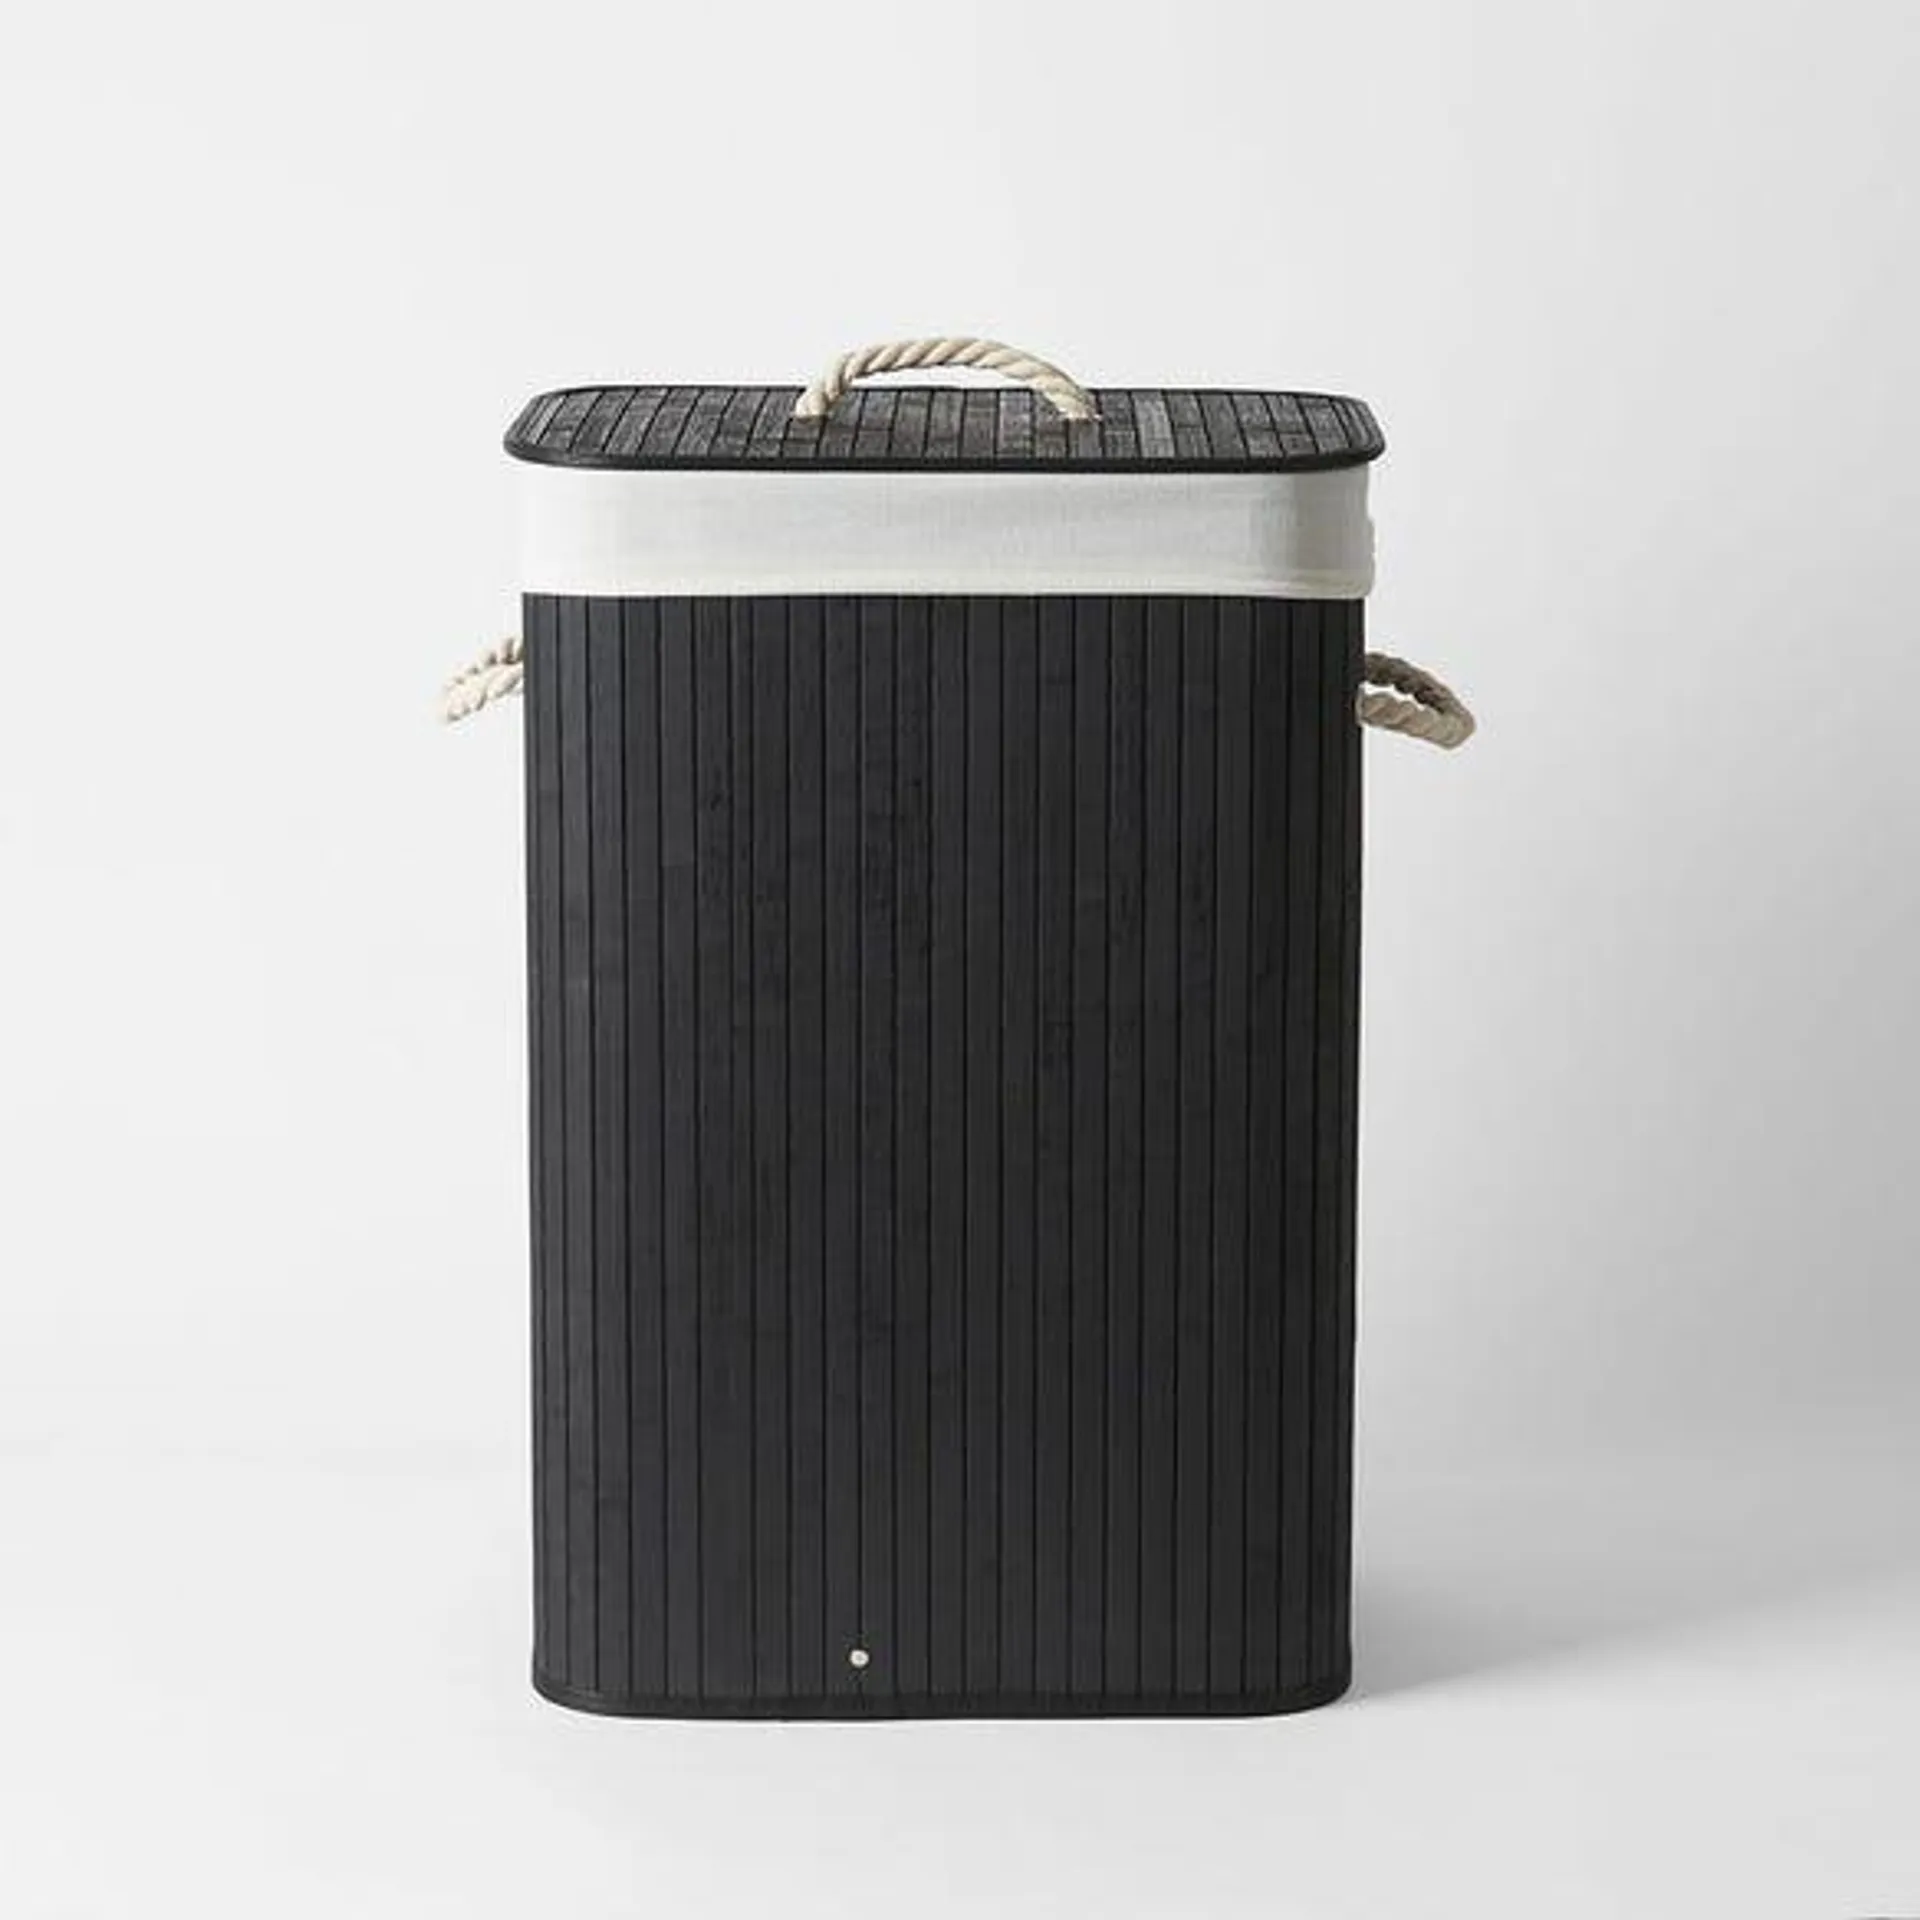 Collapsible Bamboo Hamper - Black